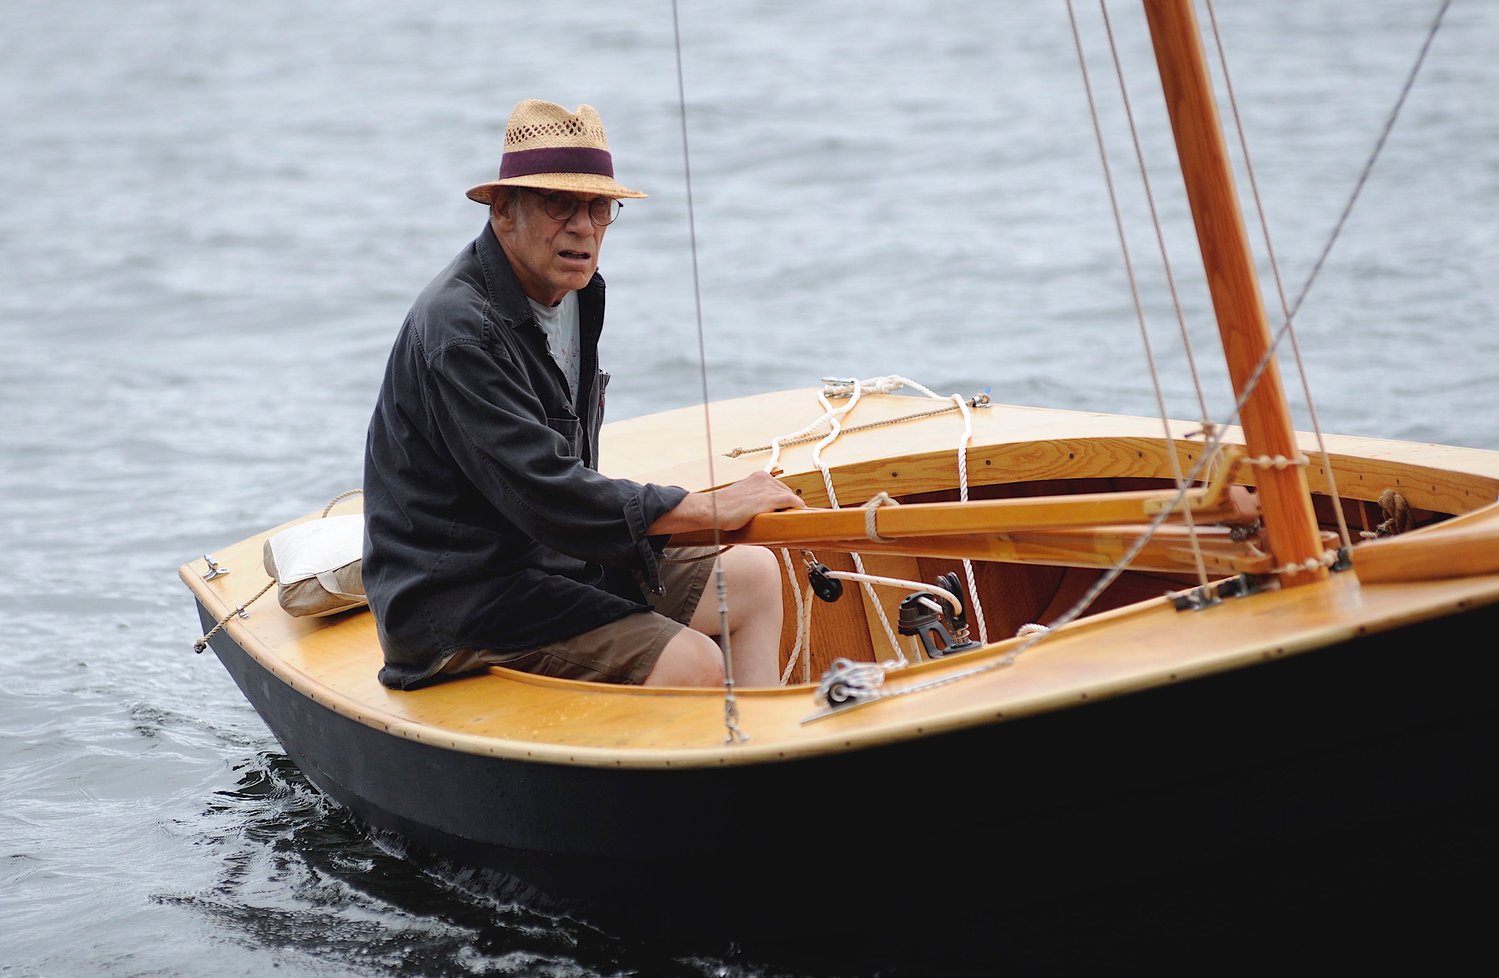 Close hauled. Steve Morse, a local artist who creates woodcut prints, heads to the dock at the Fat Lady Café in his 2000 Narwhal sailboat. As the sails were not yet rigged, he caught a tow from fellow wooden boat enthusiast Bruce Bidwell.